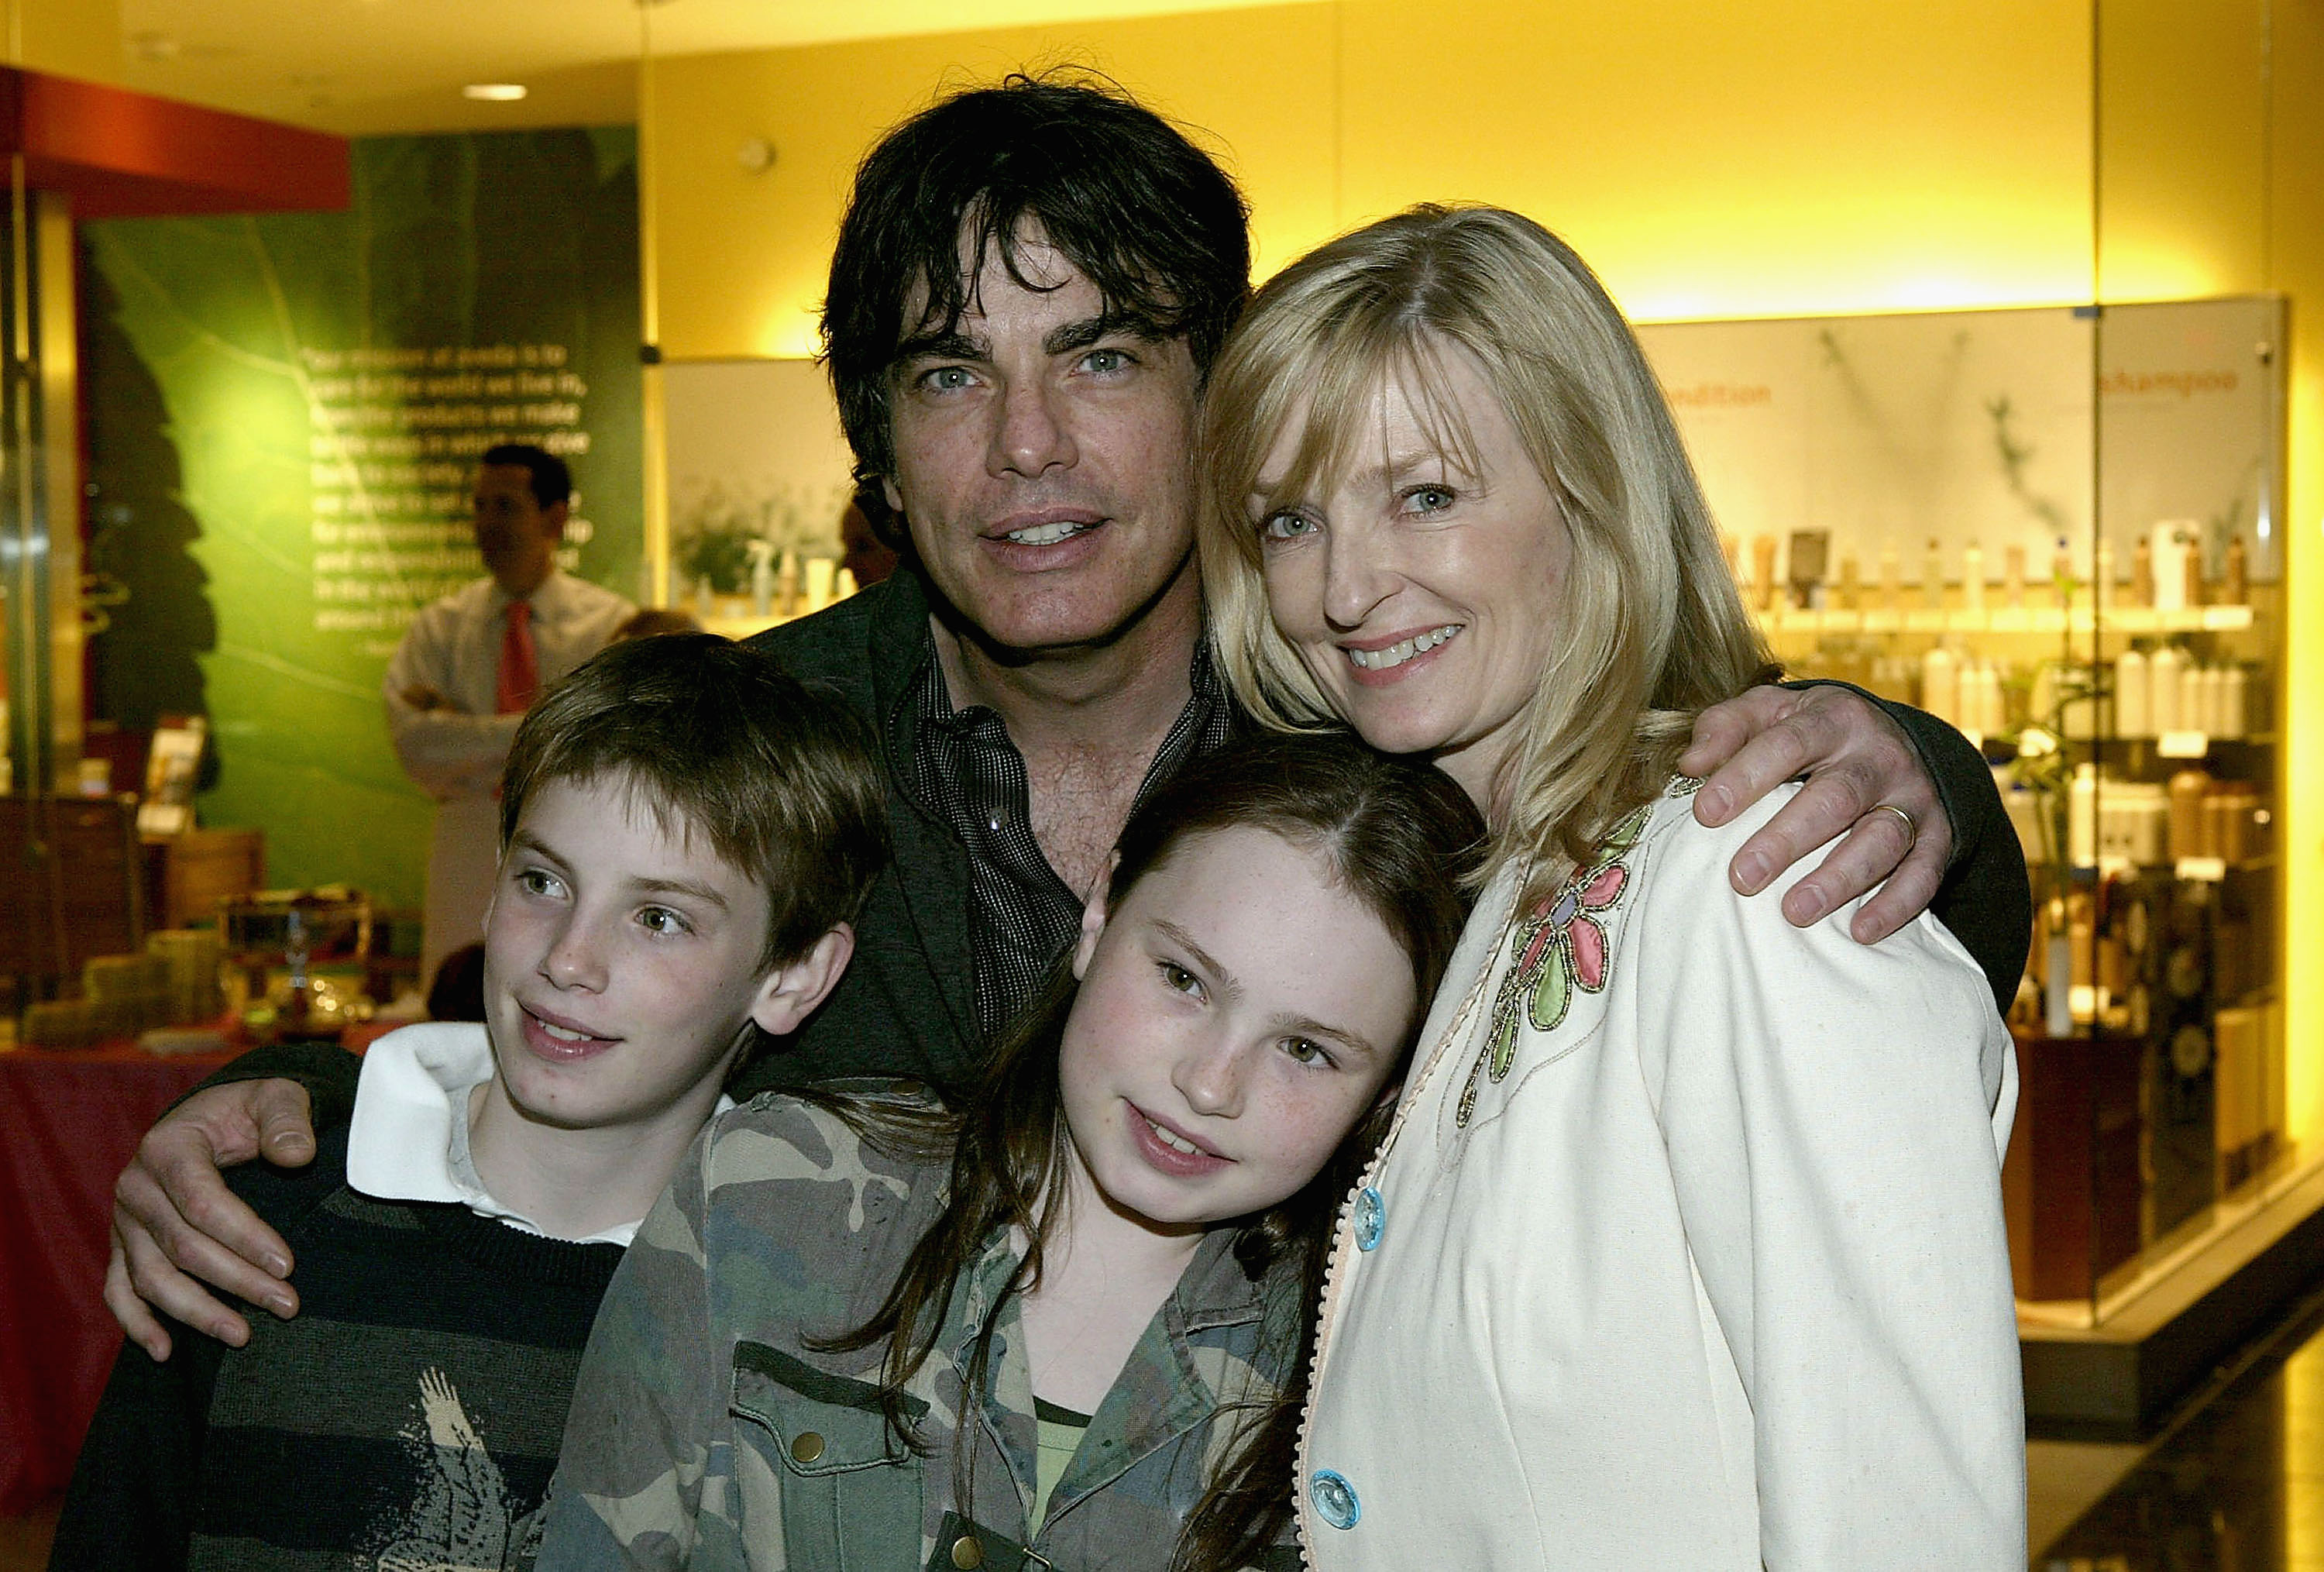 <p>Back in April 2004, "The O.C." star Peter Gallagher and his wife, Paula Harwood, took their kids, James and Kathryn, to the premiere of "Mean Girls." Kathryn was just 10 at the time but would soon begin studying theater and writing music. Keep reading to find out where her early interest in showbiz has led her...</p>